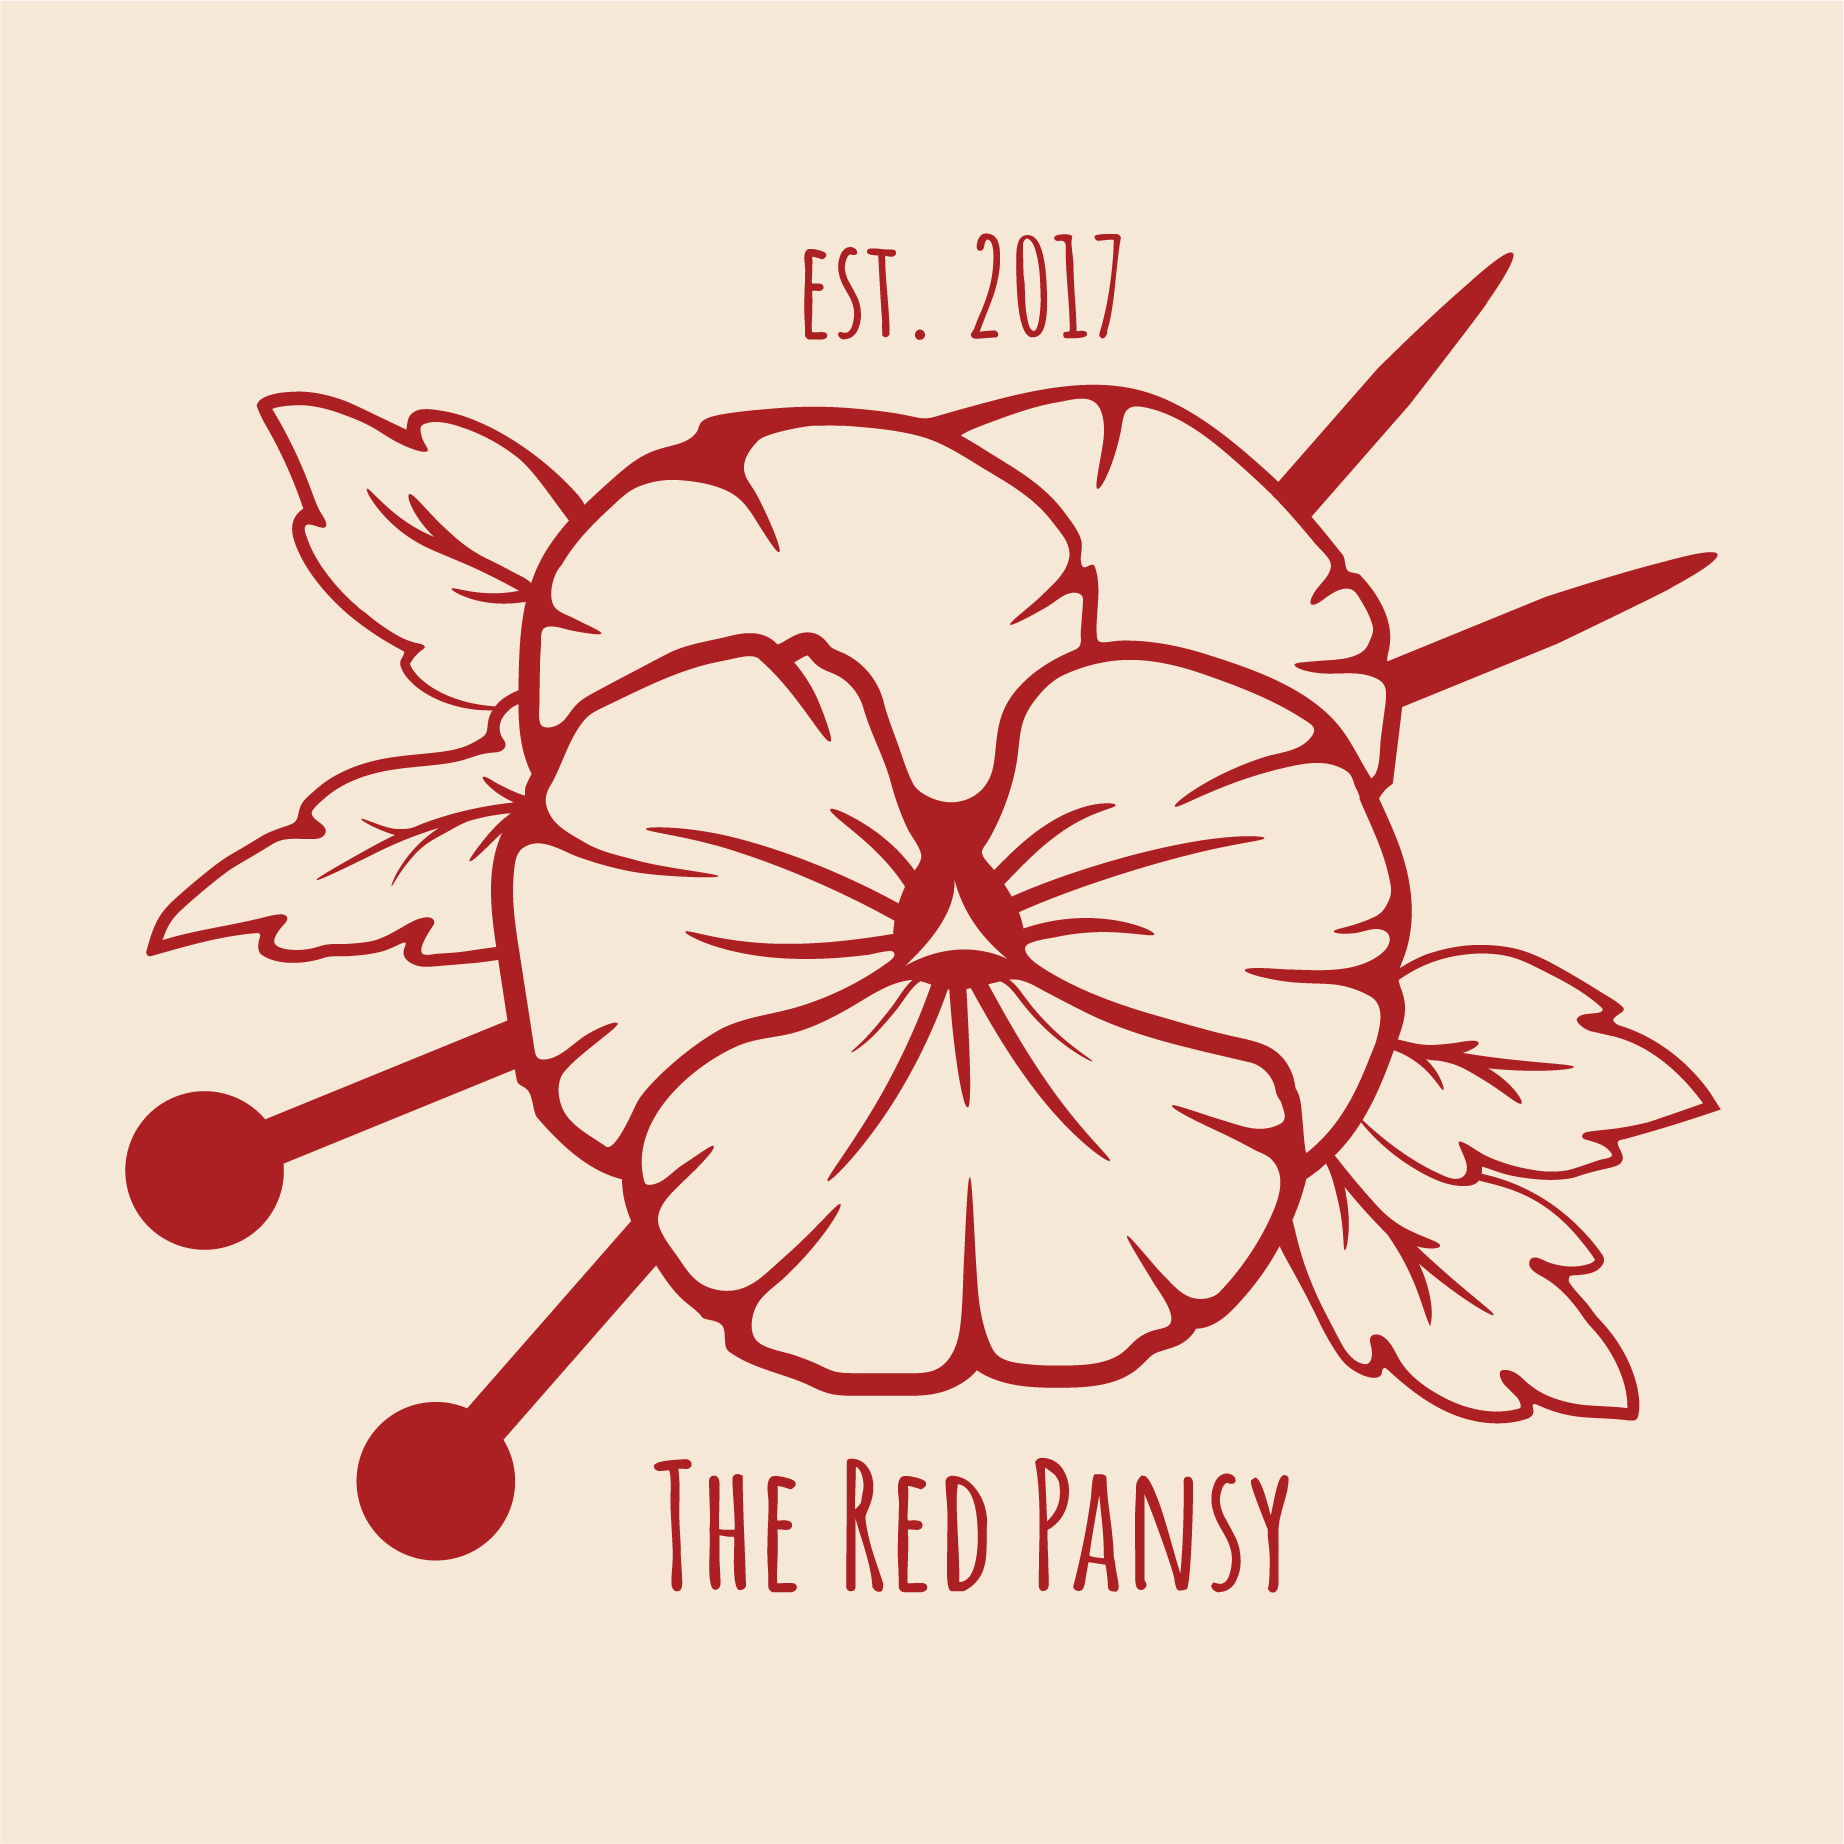 The Red Pansy